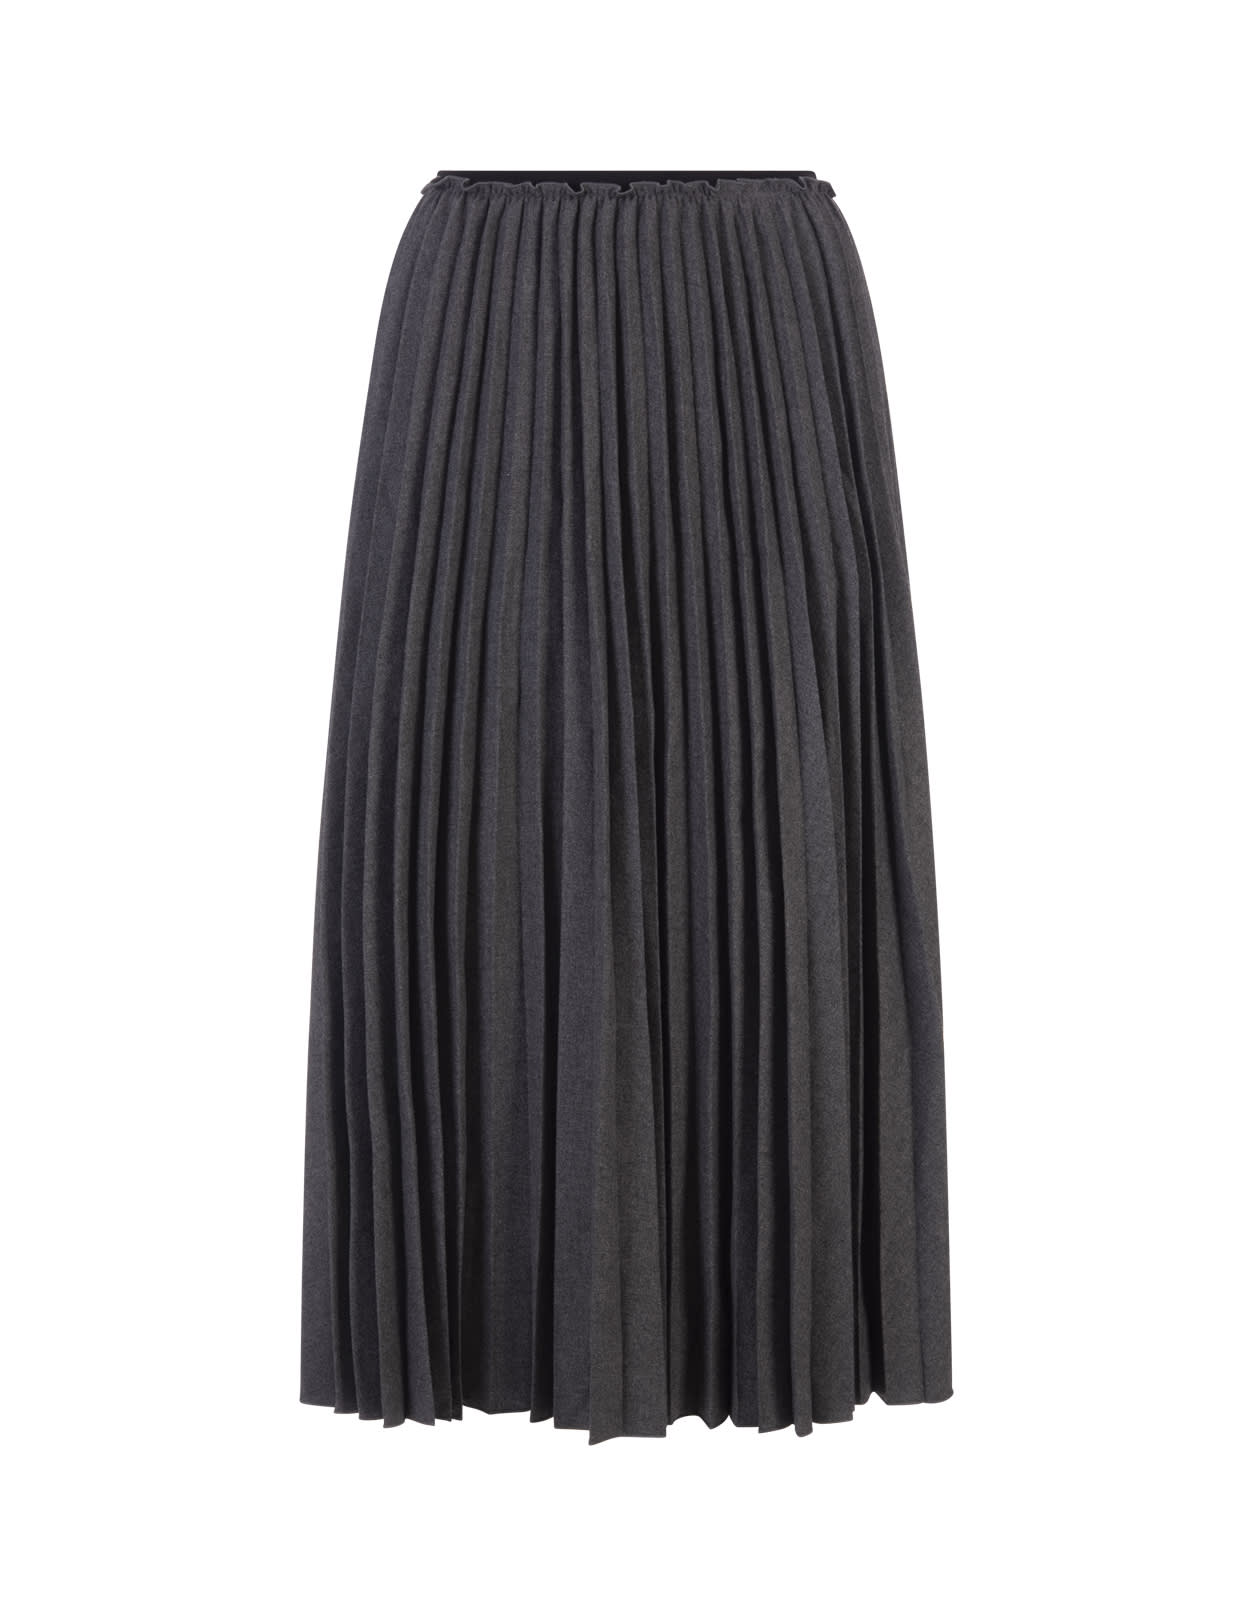 RED Valentino Grey Pleated Flannel Midi Skirt